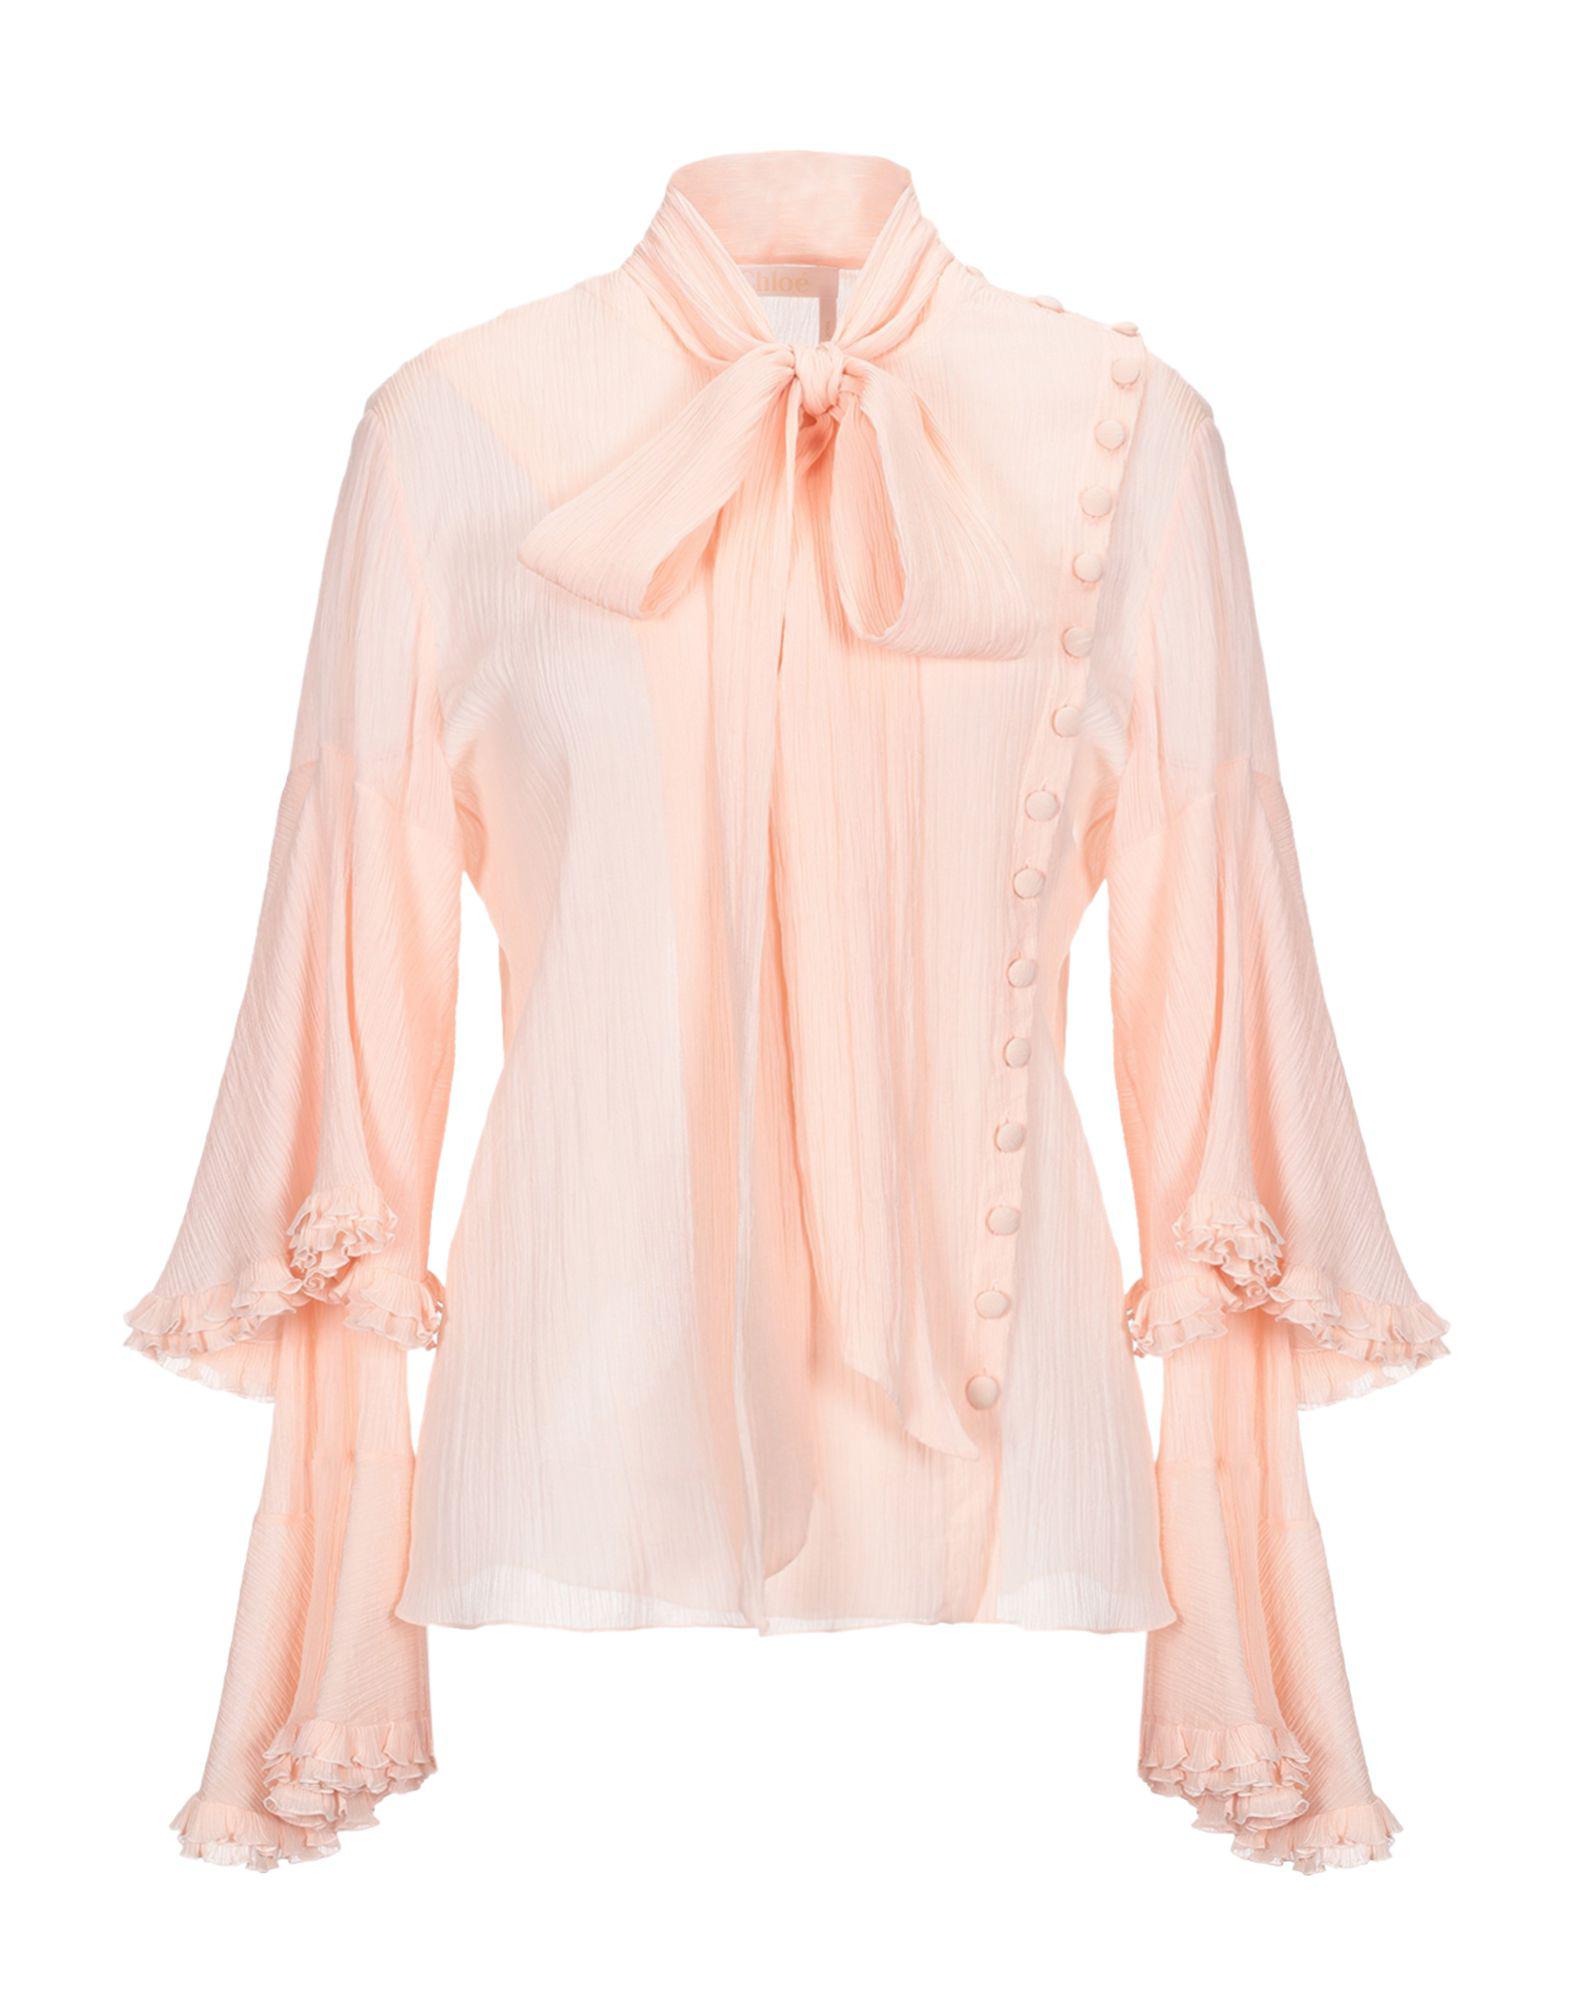 Chloé Cotton Shirt in Light Pink (Pink) - Save 23% - Lyst